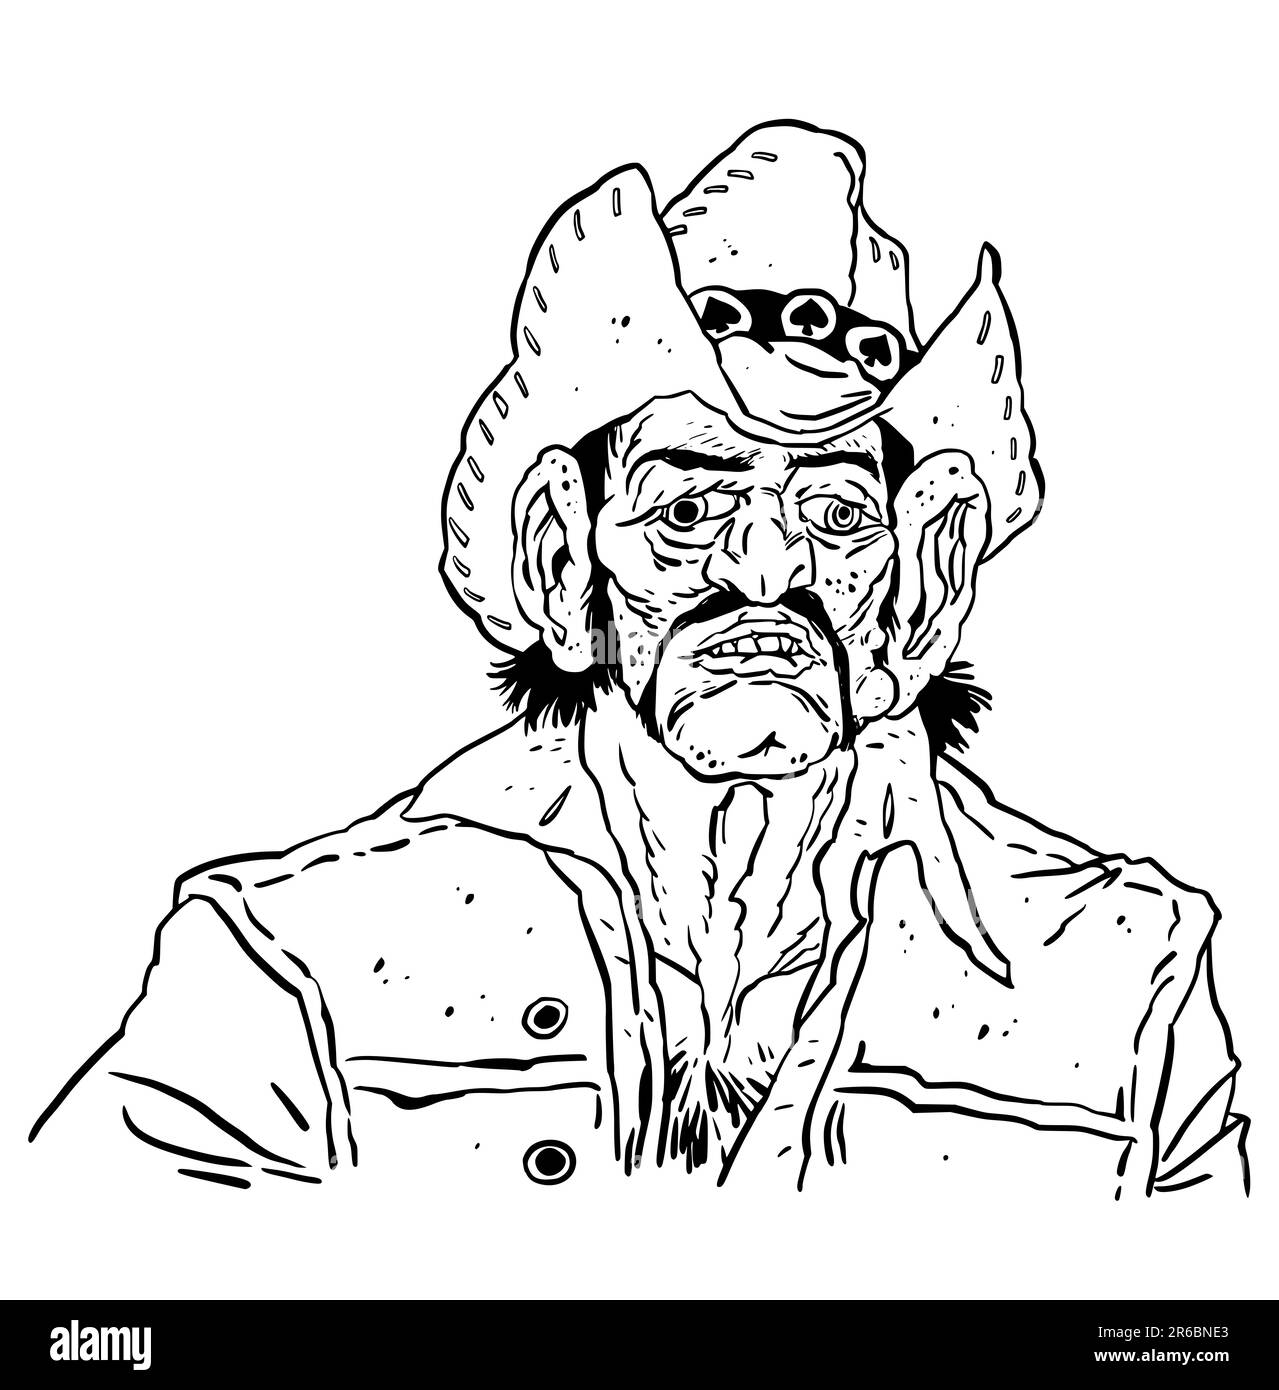 Caricature of Lemmy Ian Fraser Kilmister who founded and fronted the ...